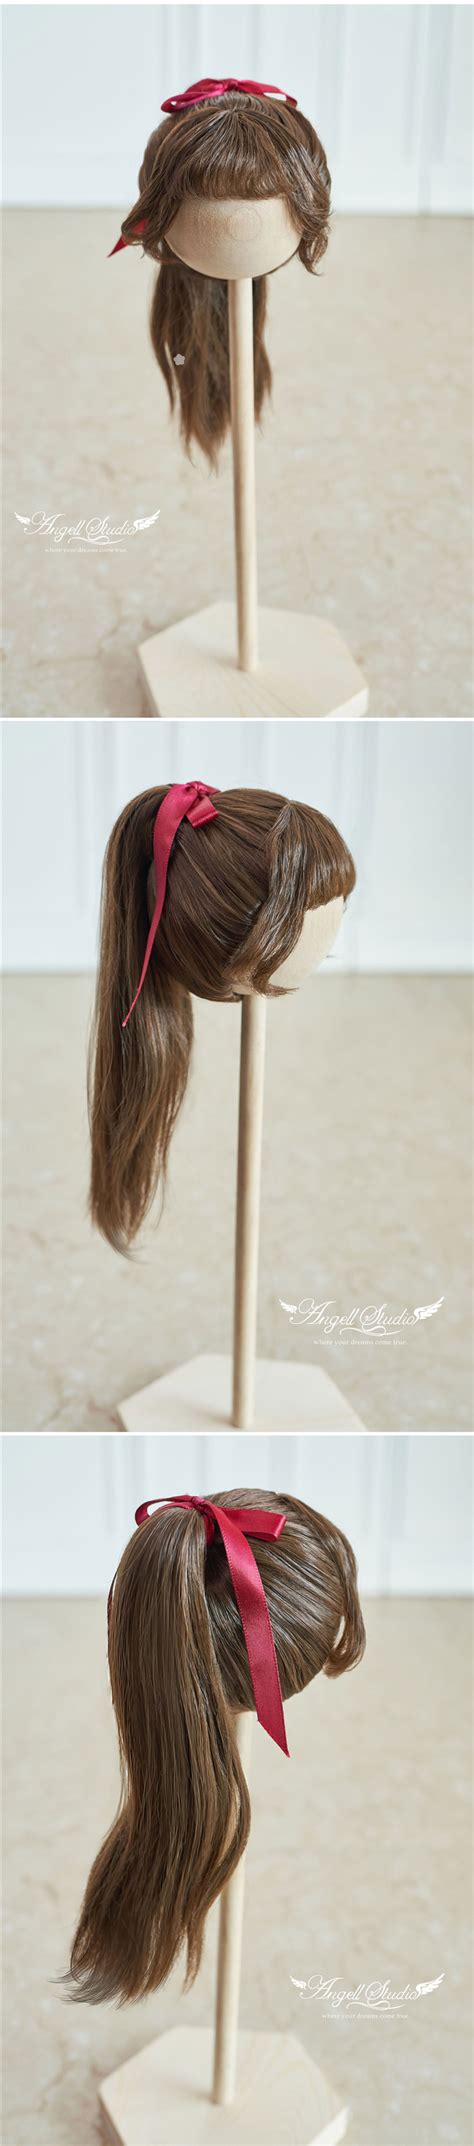 Bjd Wig Brown High Tail Curly Hair Wg For Sd Size Ball Jointed